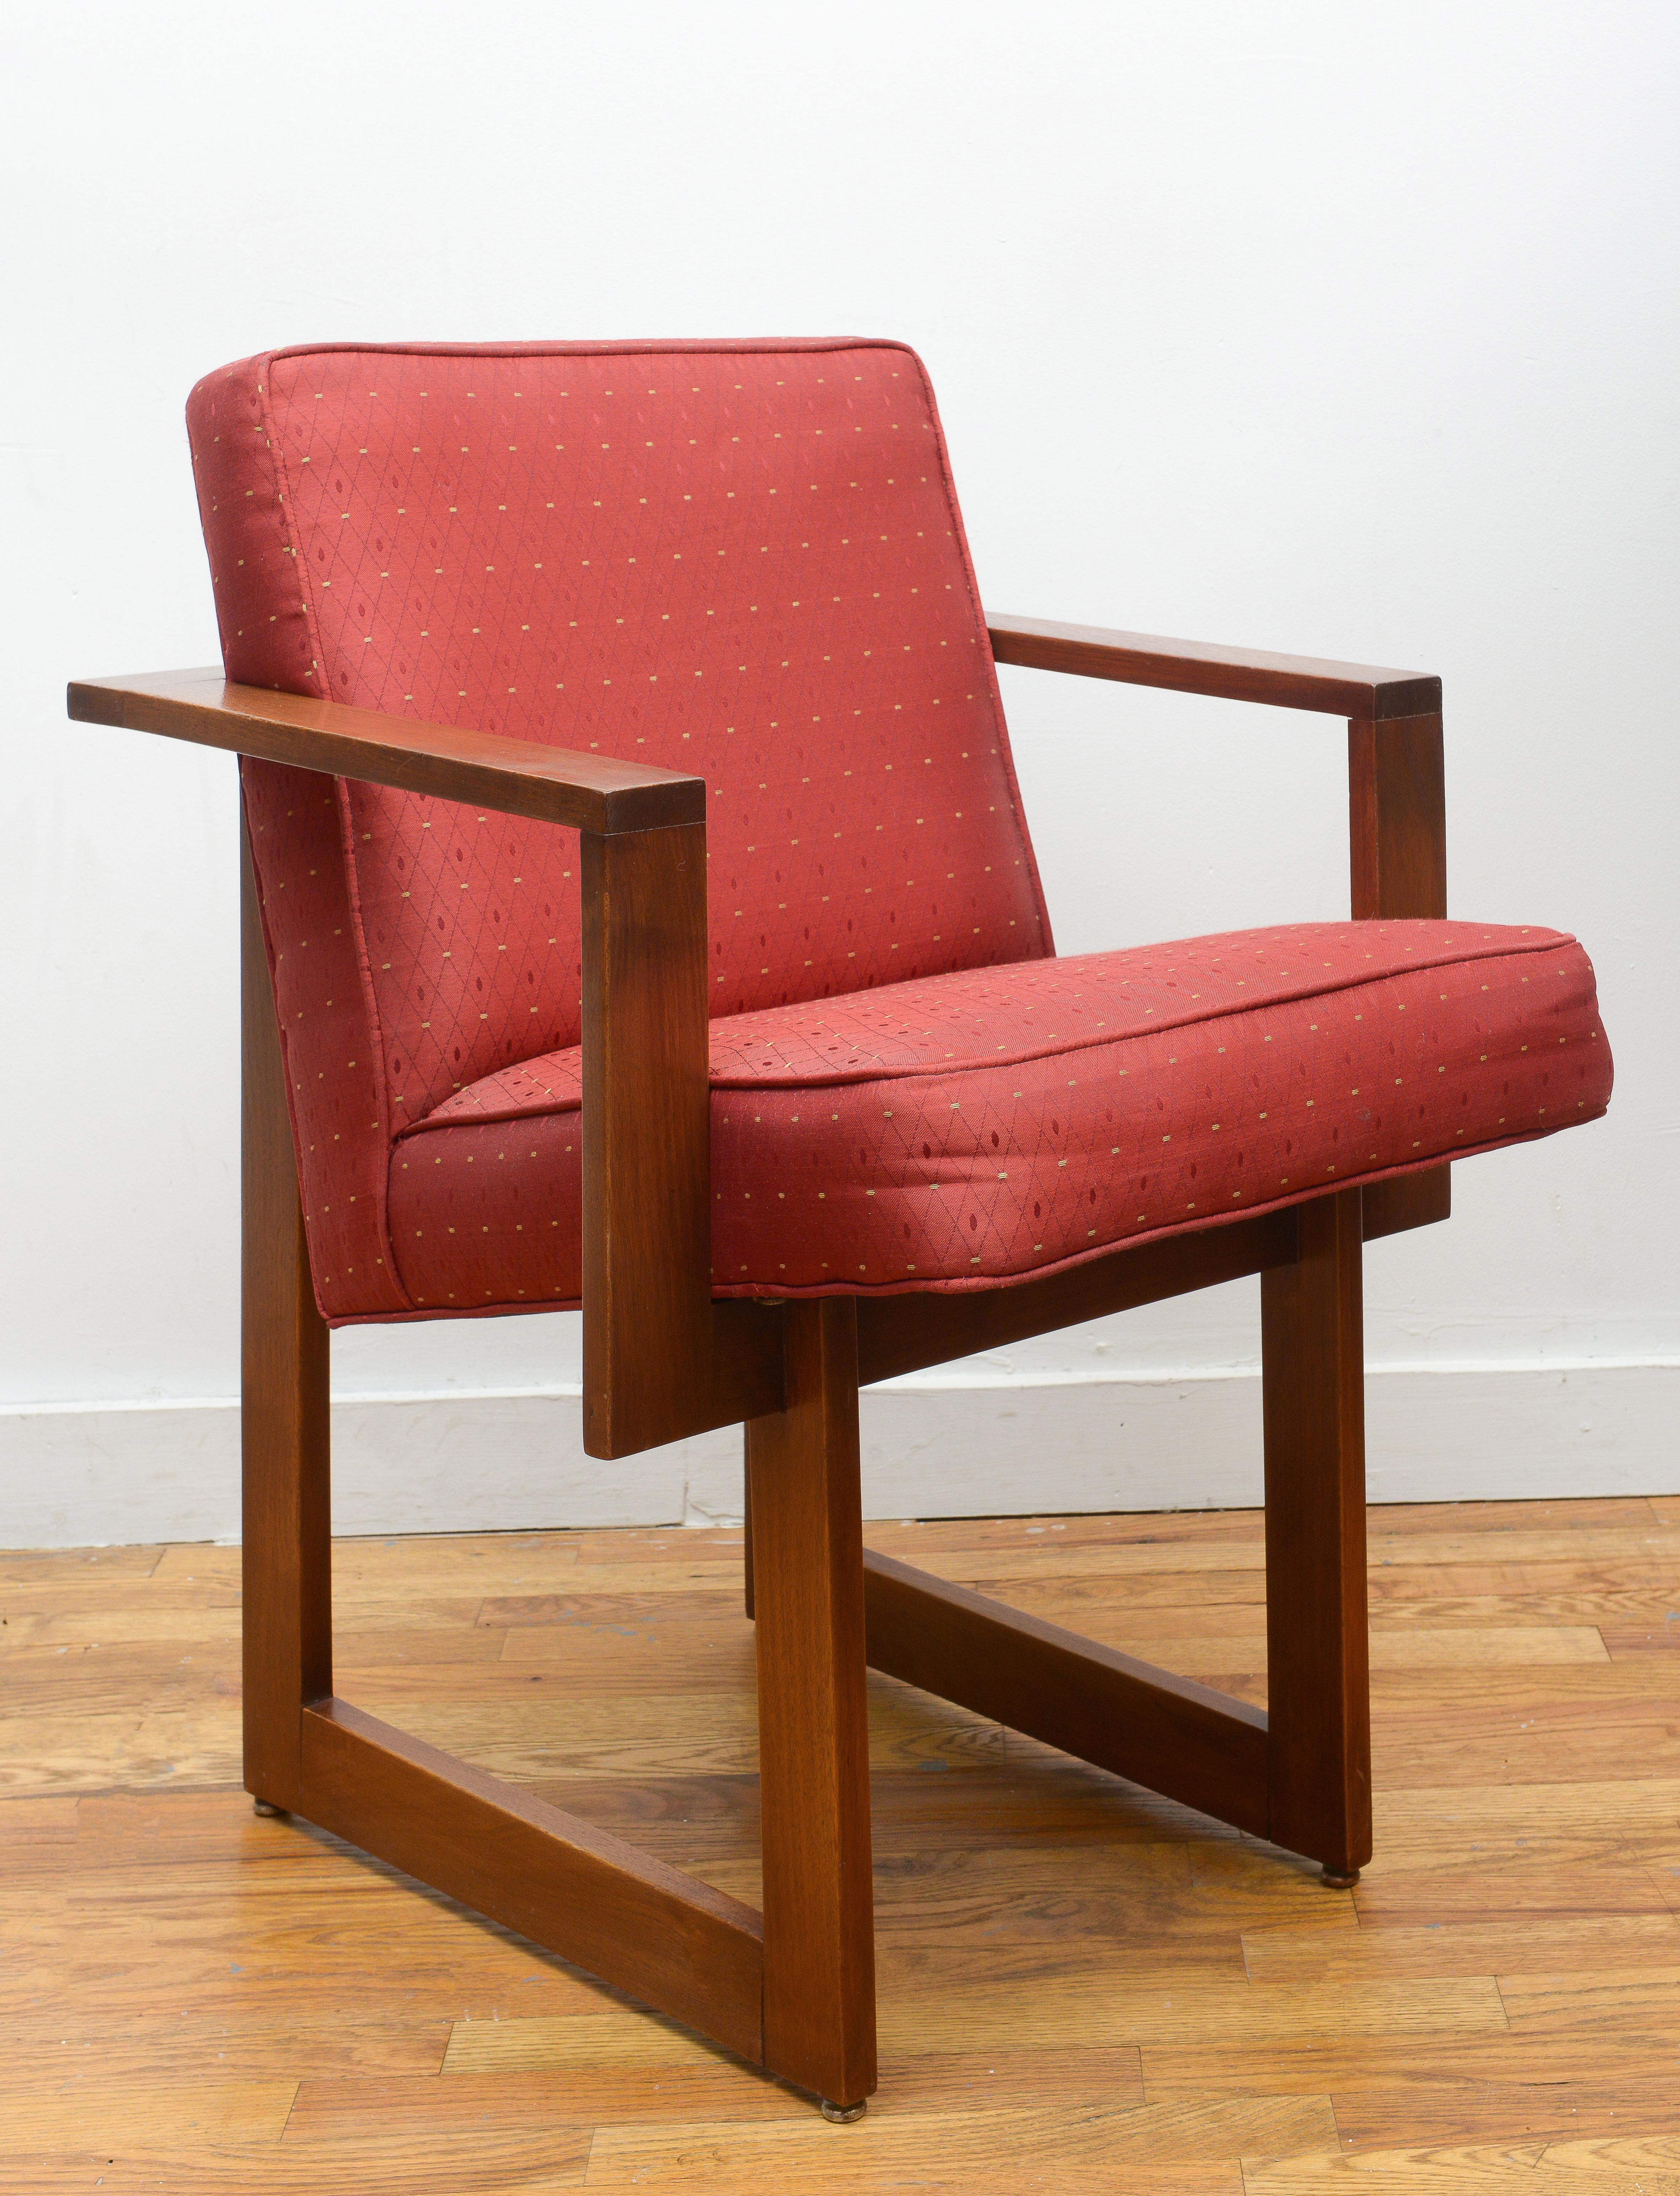 One beautiful and rare Vladimir Kagan “Cubist” armchair 1960s. The striking sculptural and sturdy frame is made out of solid Oak. This conversation starter chair is extremely comfortable and currently covered in light Persian Red fabric. A perfect